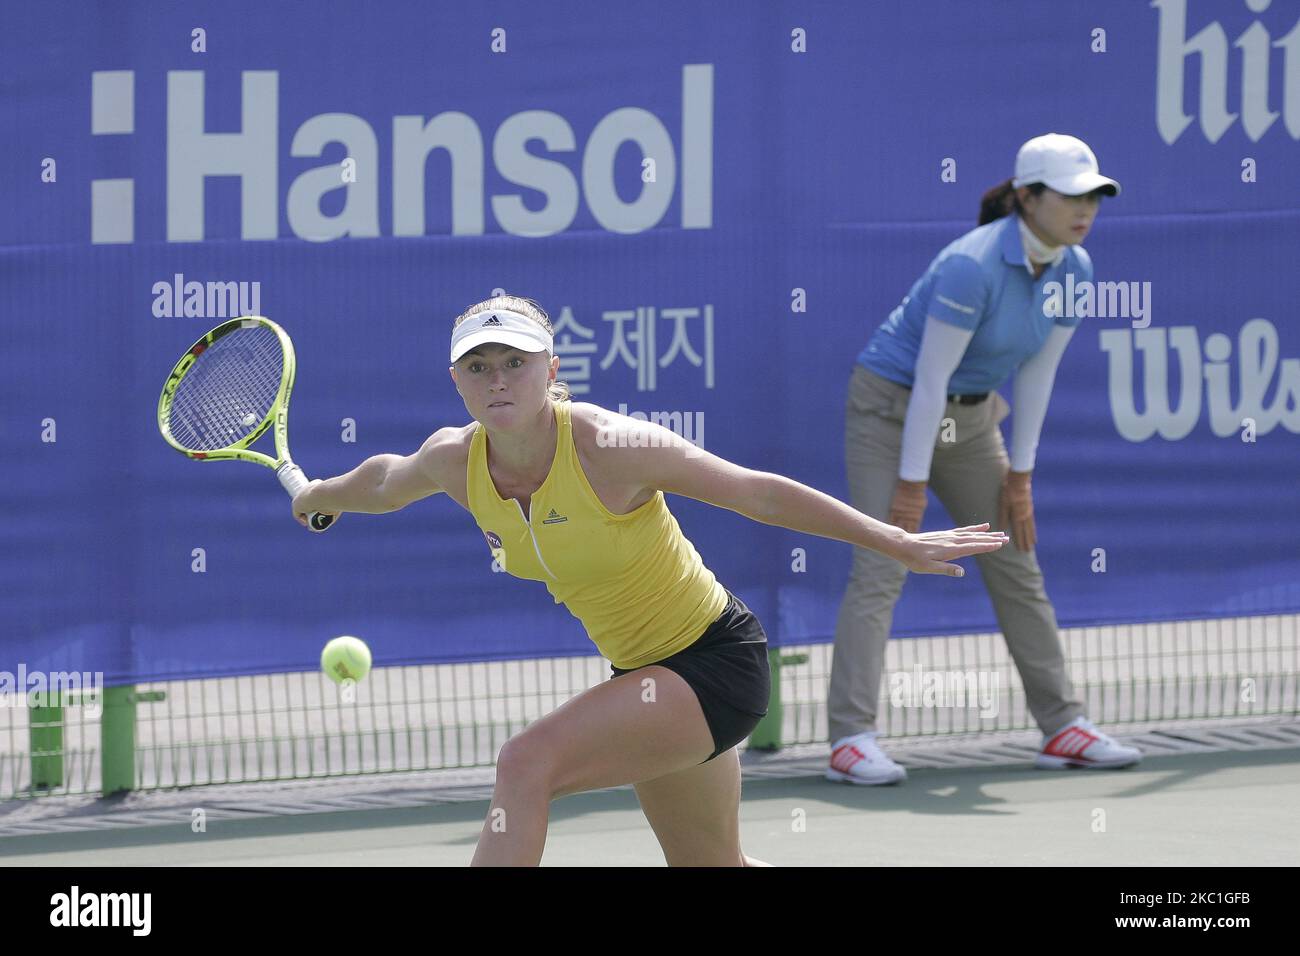 Aliaksandra Sasnovich of BLR and Magdalena Rybarikova of SVK play a match during the WTA Korea Open Third Round at Olympic Park Tennis Court in Seoul, South Korea on September 24, 2015. Aliaksandra Sasnovich Match won score by 6-3,6-3. (Photo by Seung-il Ryu/NurPhoto) Stock Photo